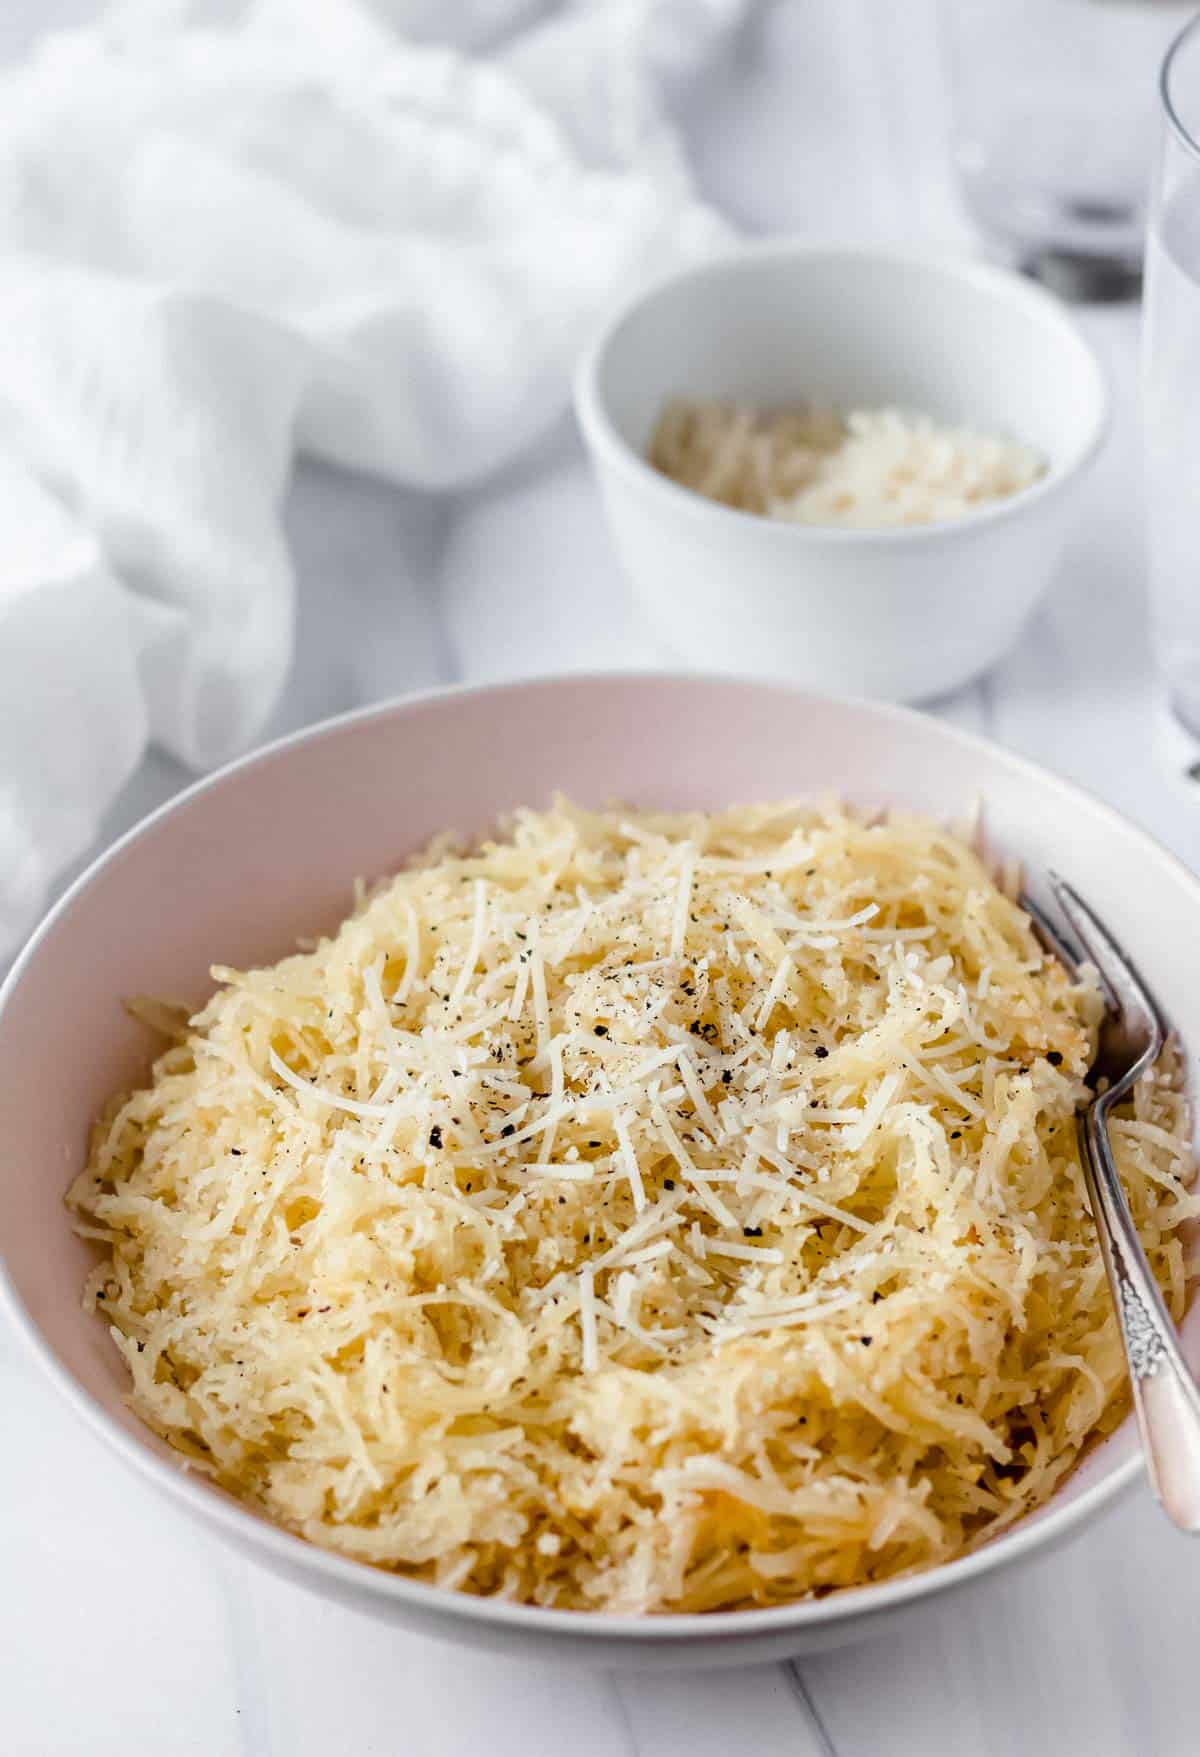 A pink bowl of spaghetti squash cacio e pepe with a fork in it, a small white bowl of cheese, a glass of water and a white towel in the background